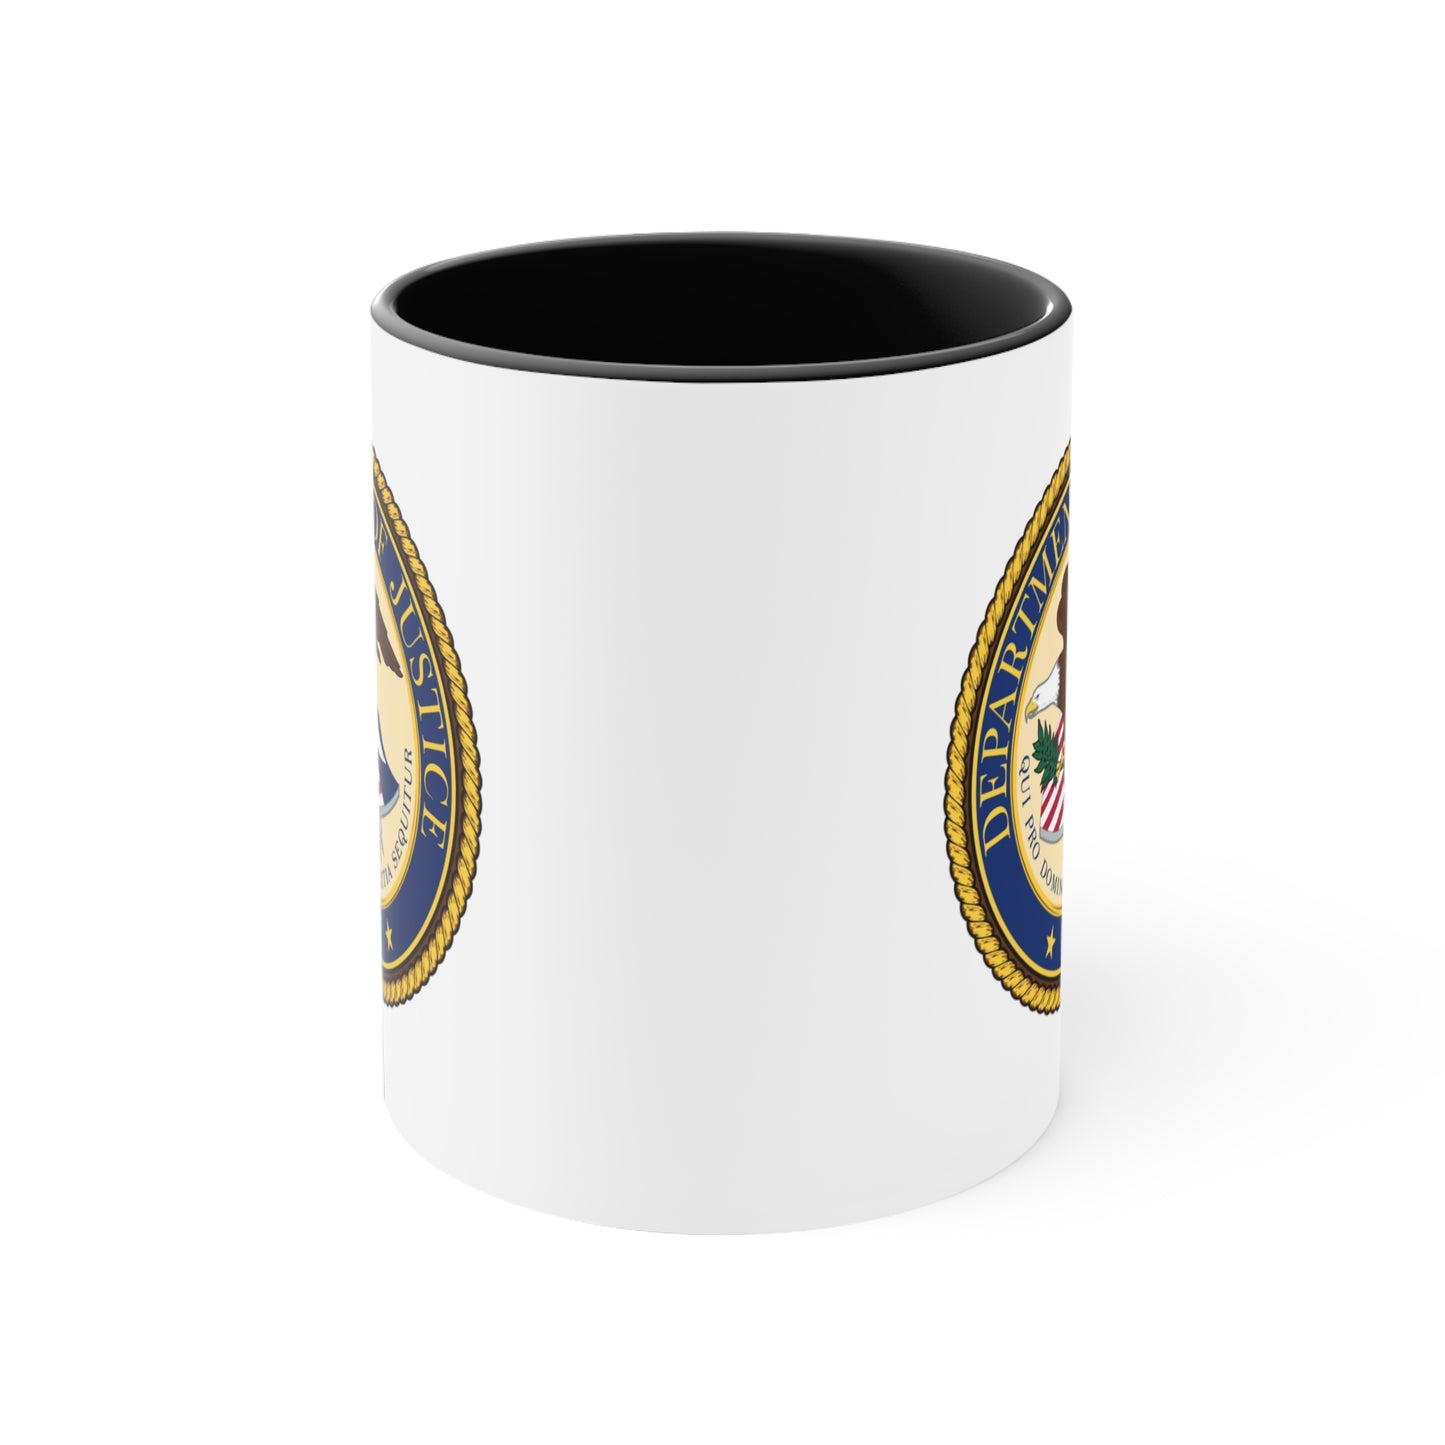 Department of Justice Coffee Mug - Double Sided Black Accent White Ceramic 11oz by TheGlassyLass